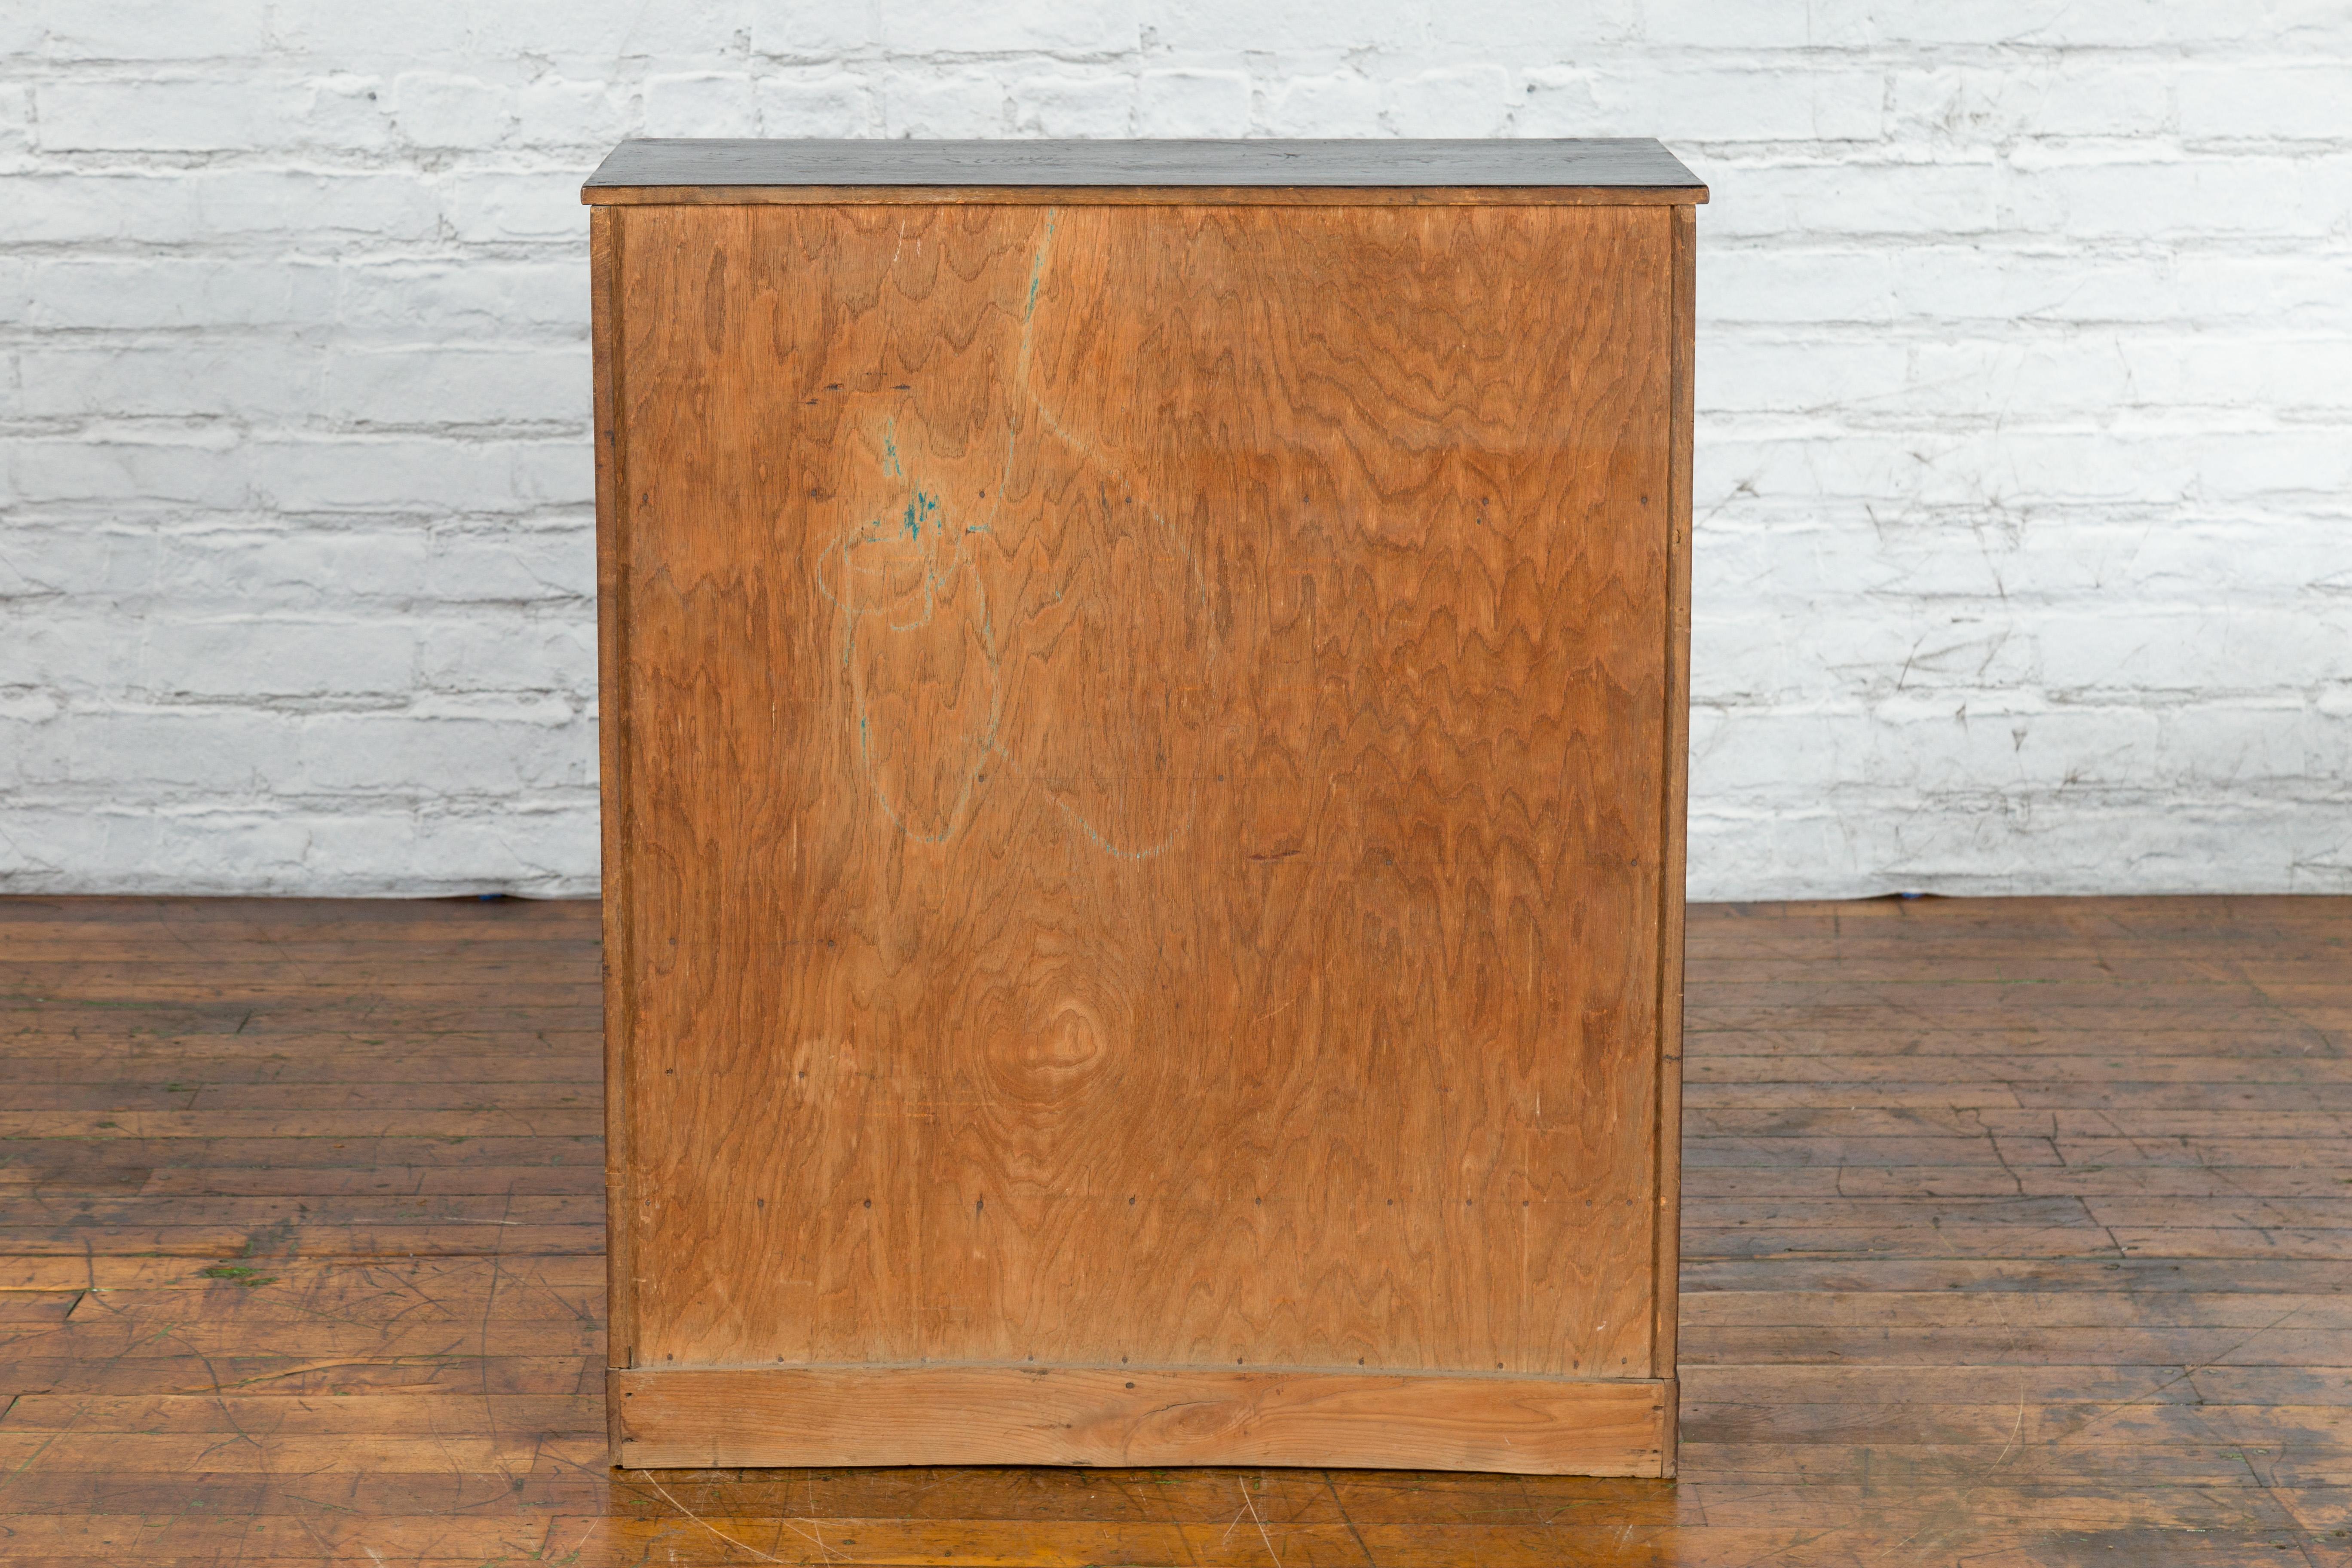 Japanese 19th Century Zebra Wood Cabinet with Sliding Doors, Panel and Drawers For Sale 5